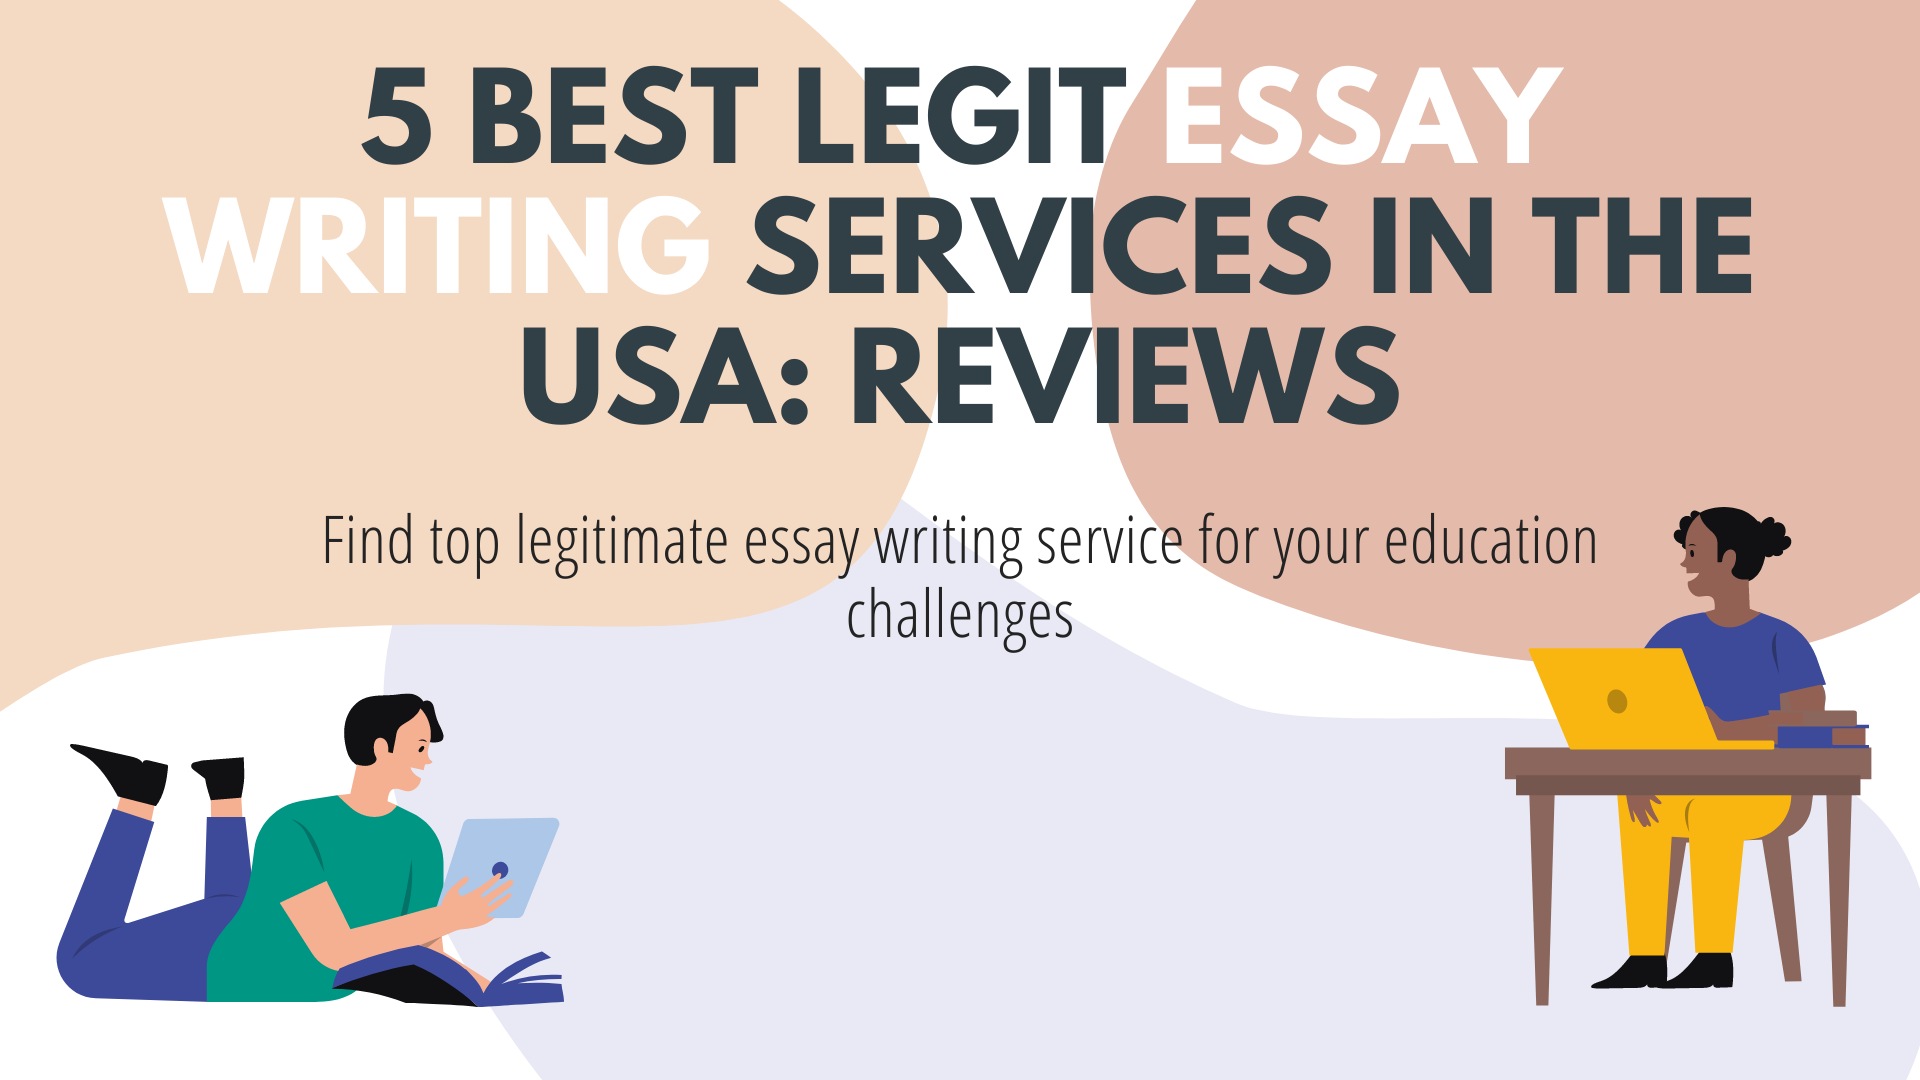 5 Best Legit Essay Writing Services in the USA: Reviews - Business Review